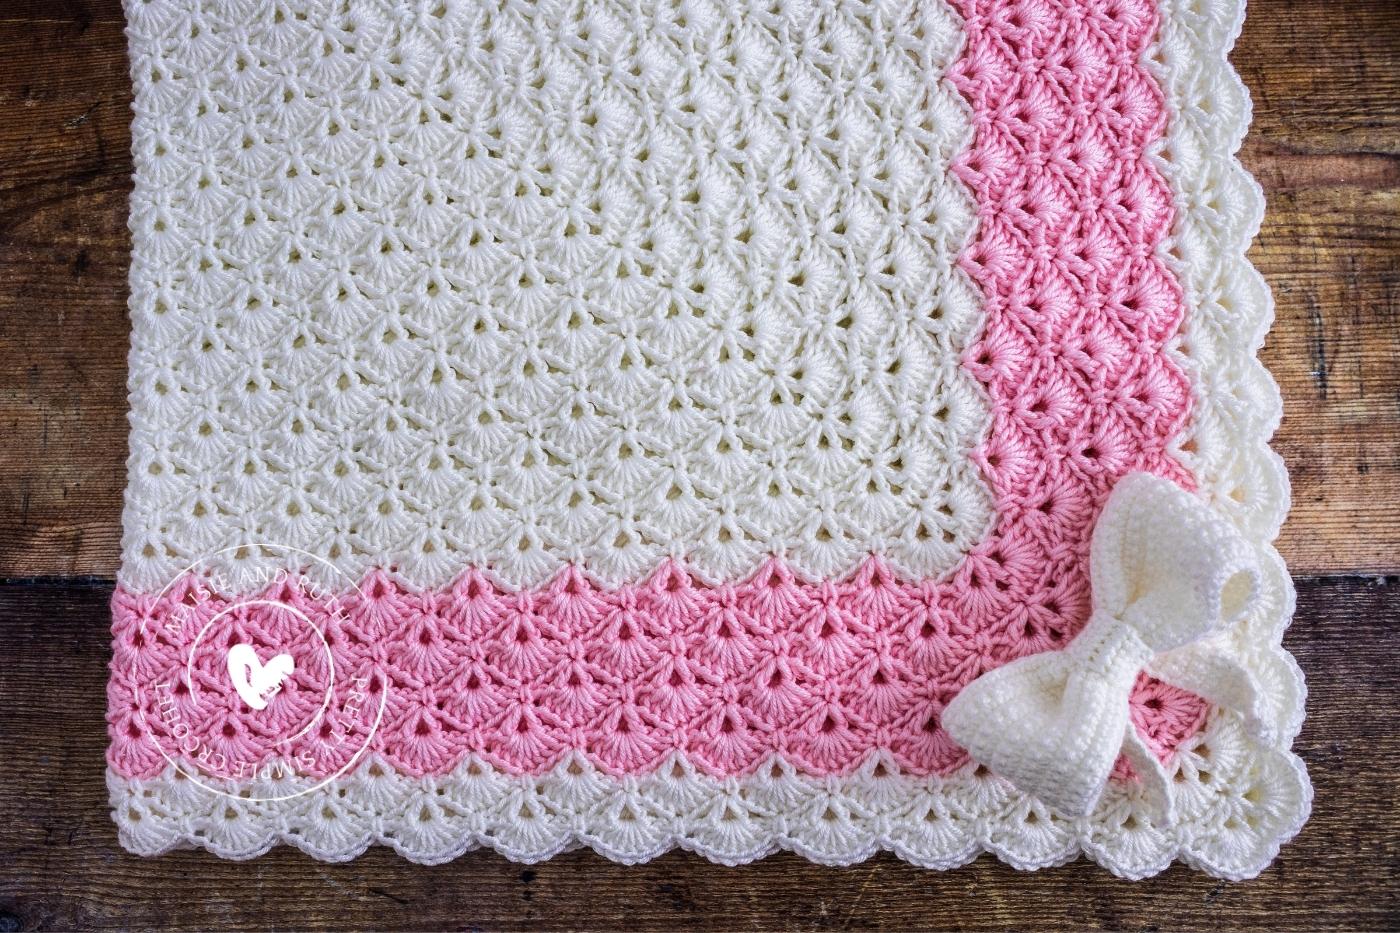 crochet baby blanket in the round top down view